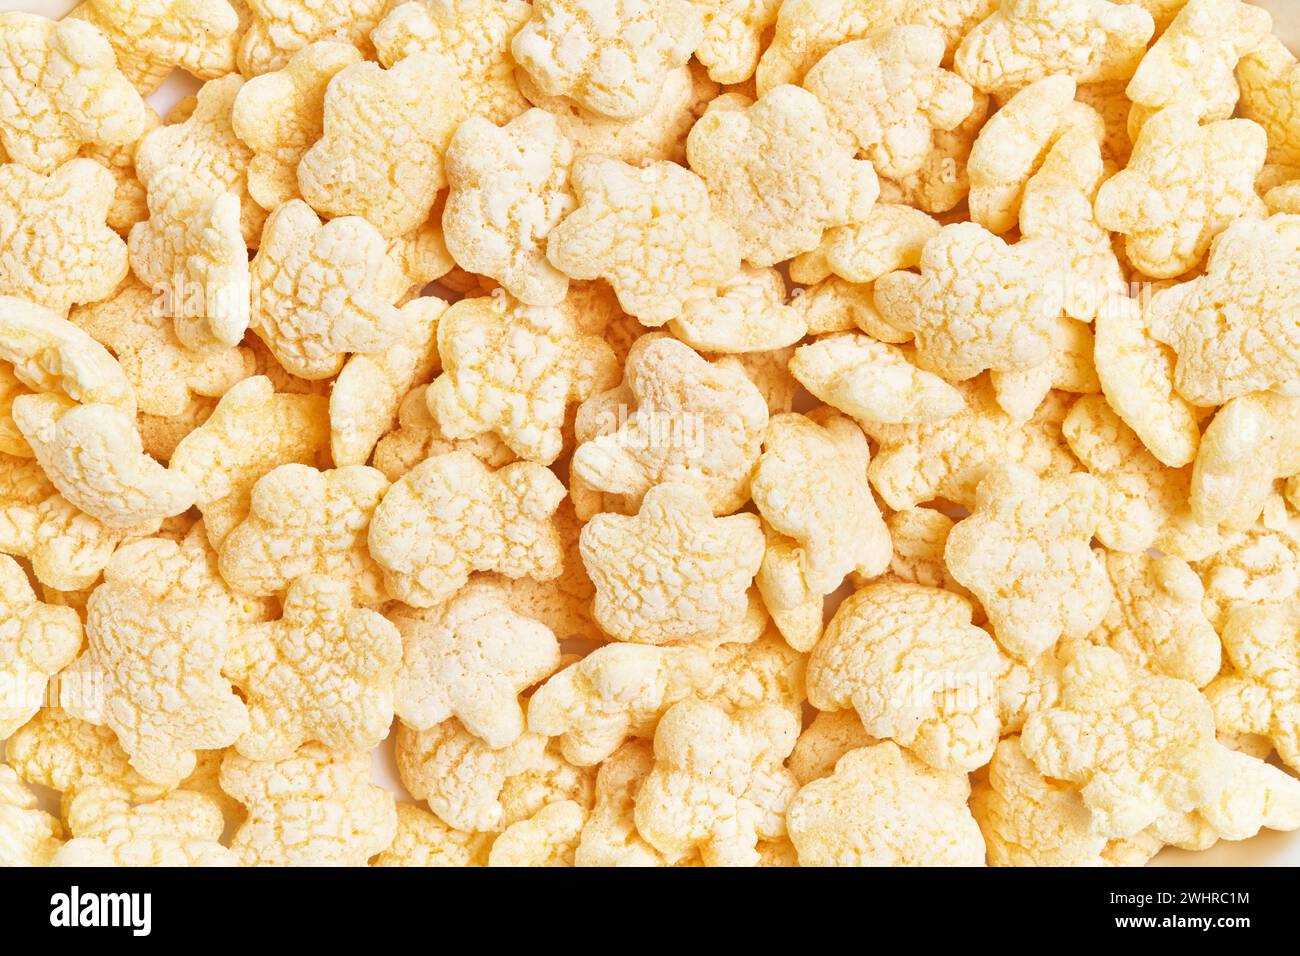 Close-up of yellow rice crisps filling the frame, representing snacks, diet, texture, and food background Stock Photo